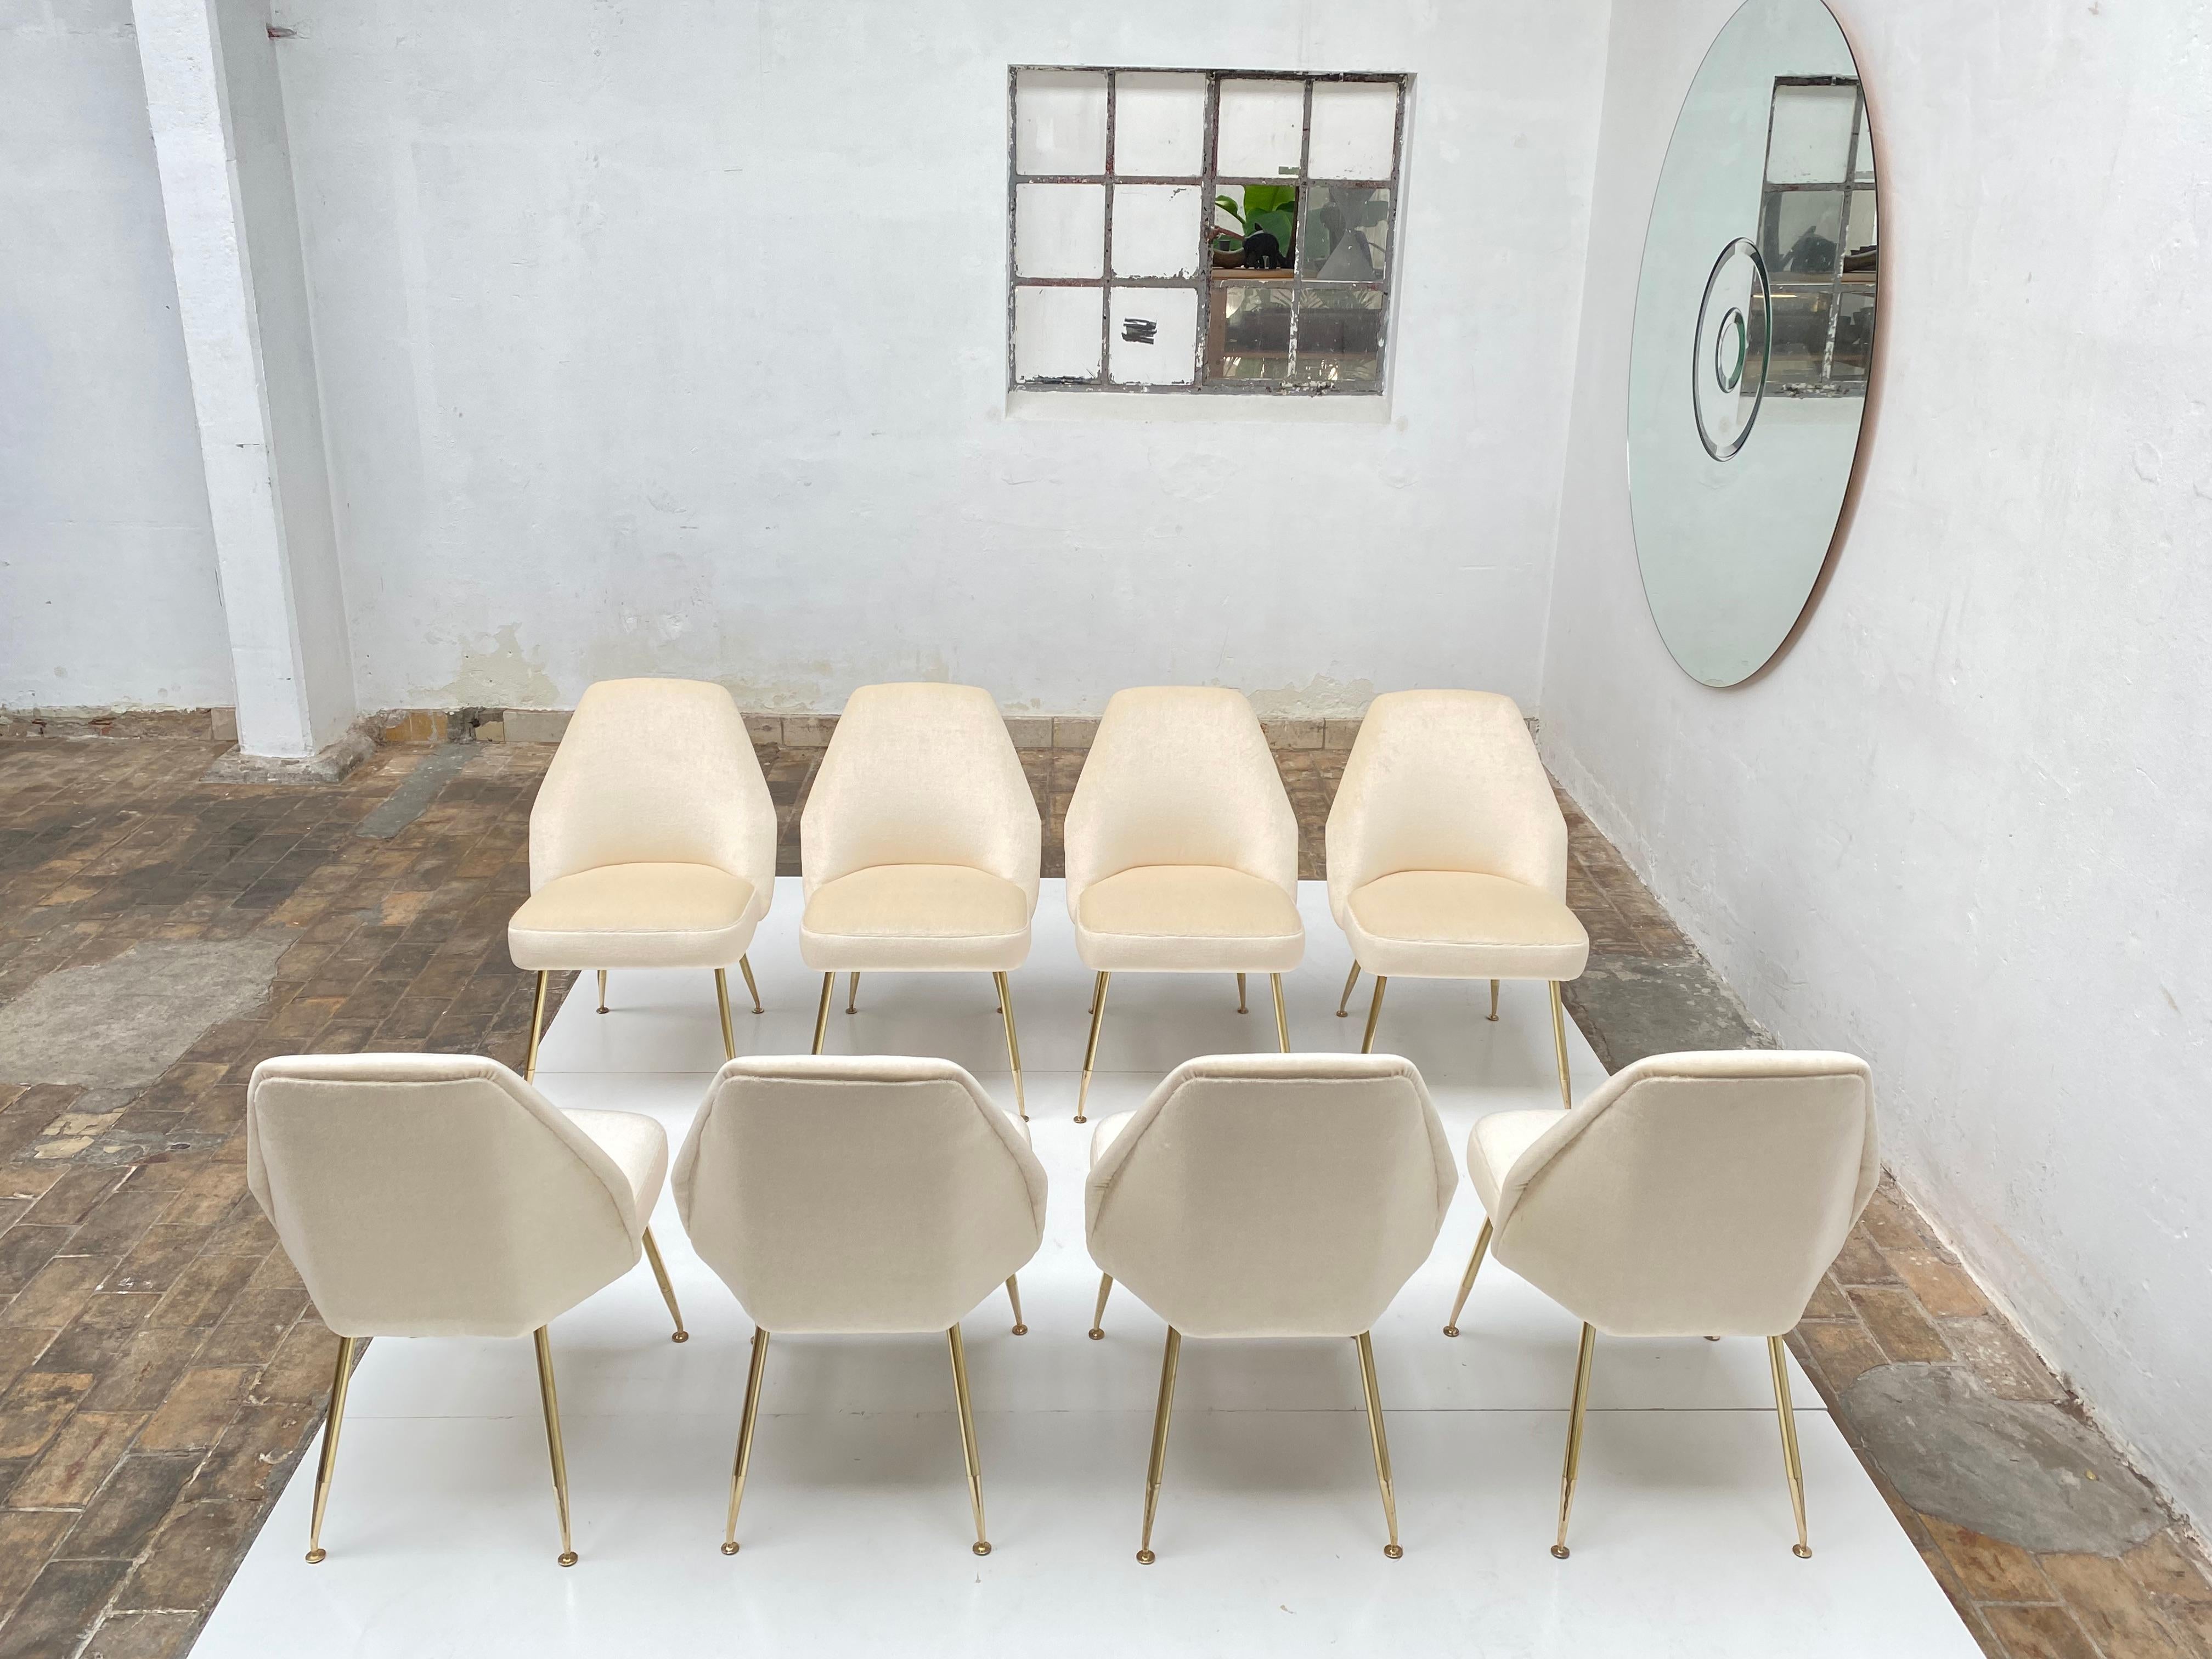 Amazing set of eight restored 'Campanula' dining chairs designed by Italian architect Carlo Pagani (architectural partner of both Gio Ponti and Lina Bo Bardi) for Arflex, Italy in 1952. These chairs have had their upholstery completely restored and